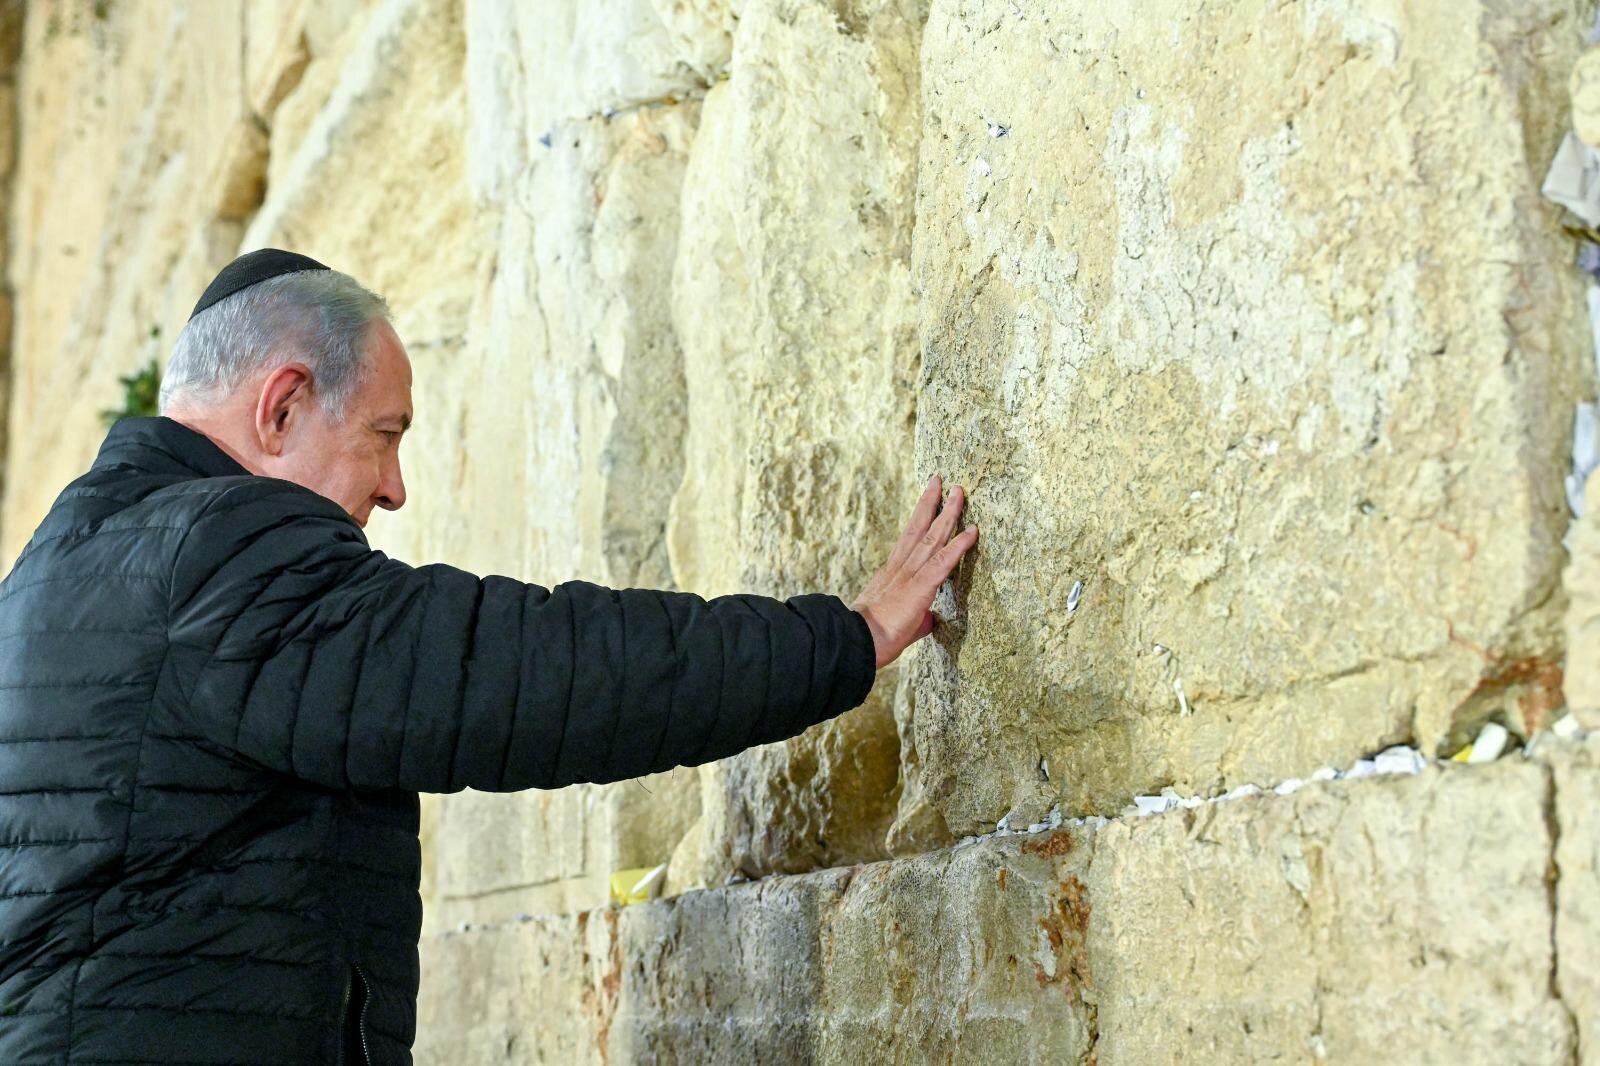 Netanyahu visits Western Wall to mark government’s inauguration - JNS.org